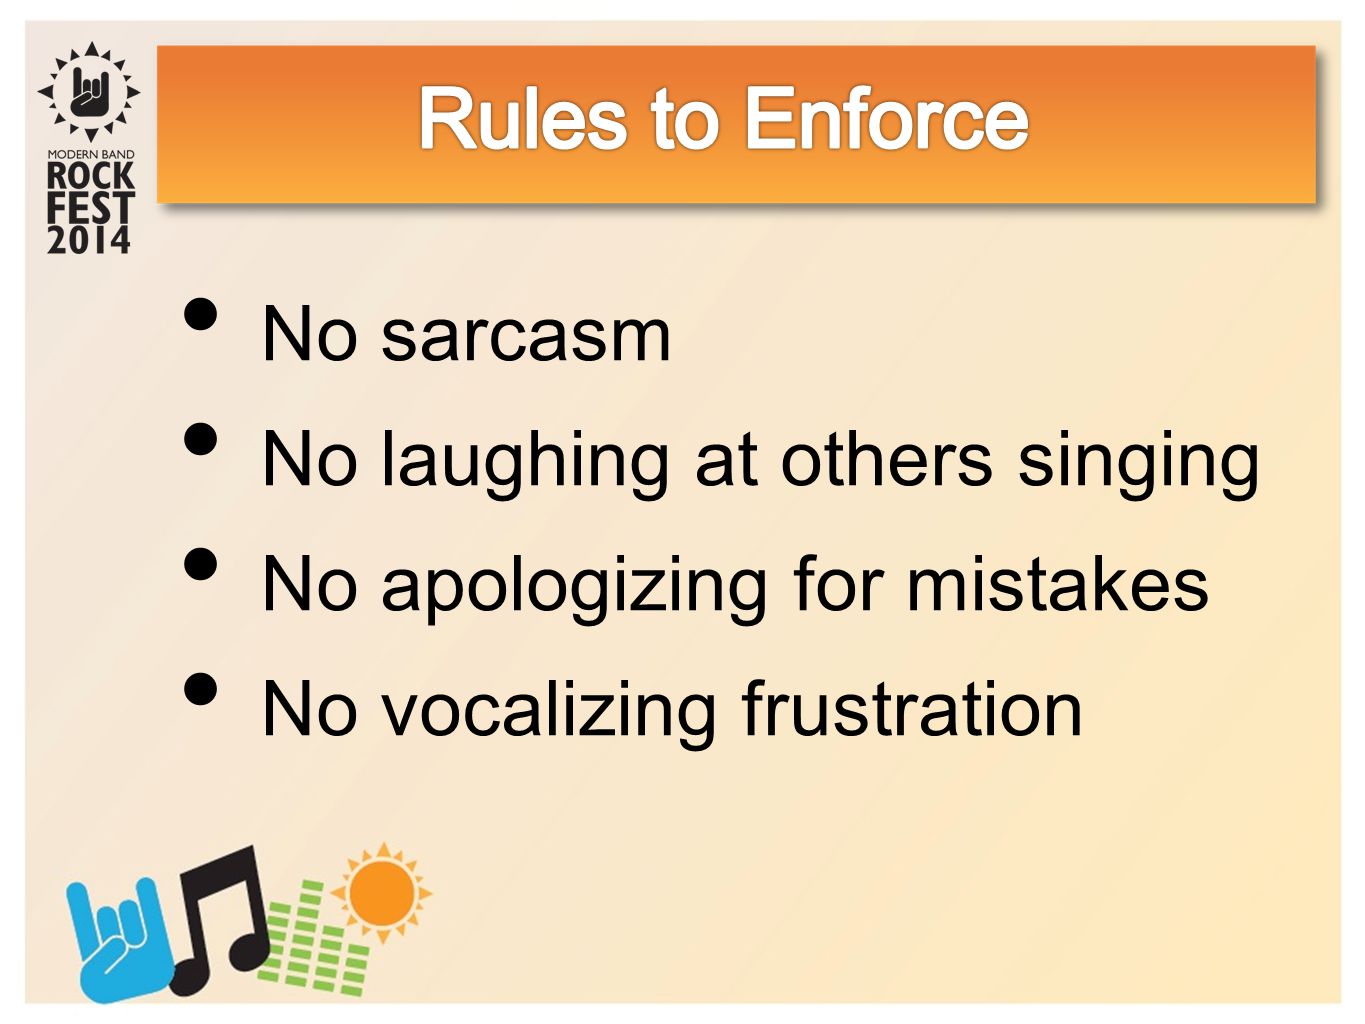 No sarcasm No laughing at others singing No apologizing for mistakes No vocalizing frustration